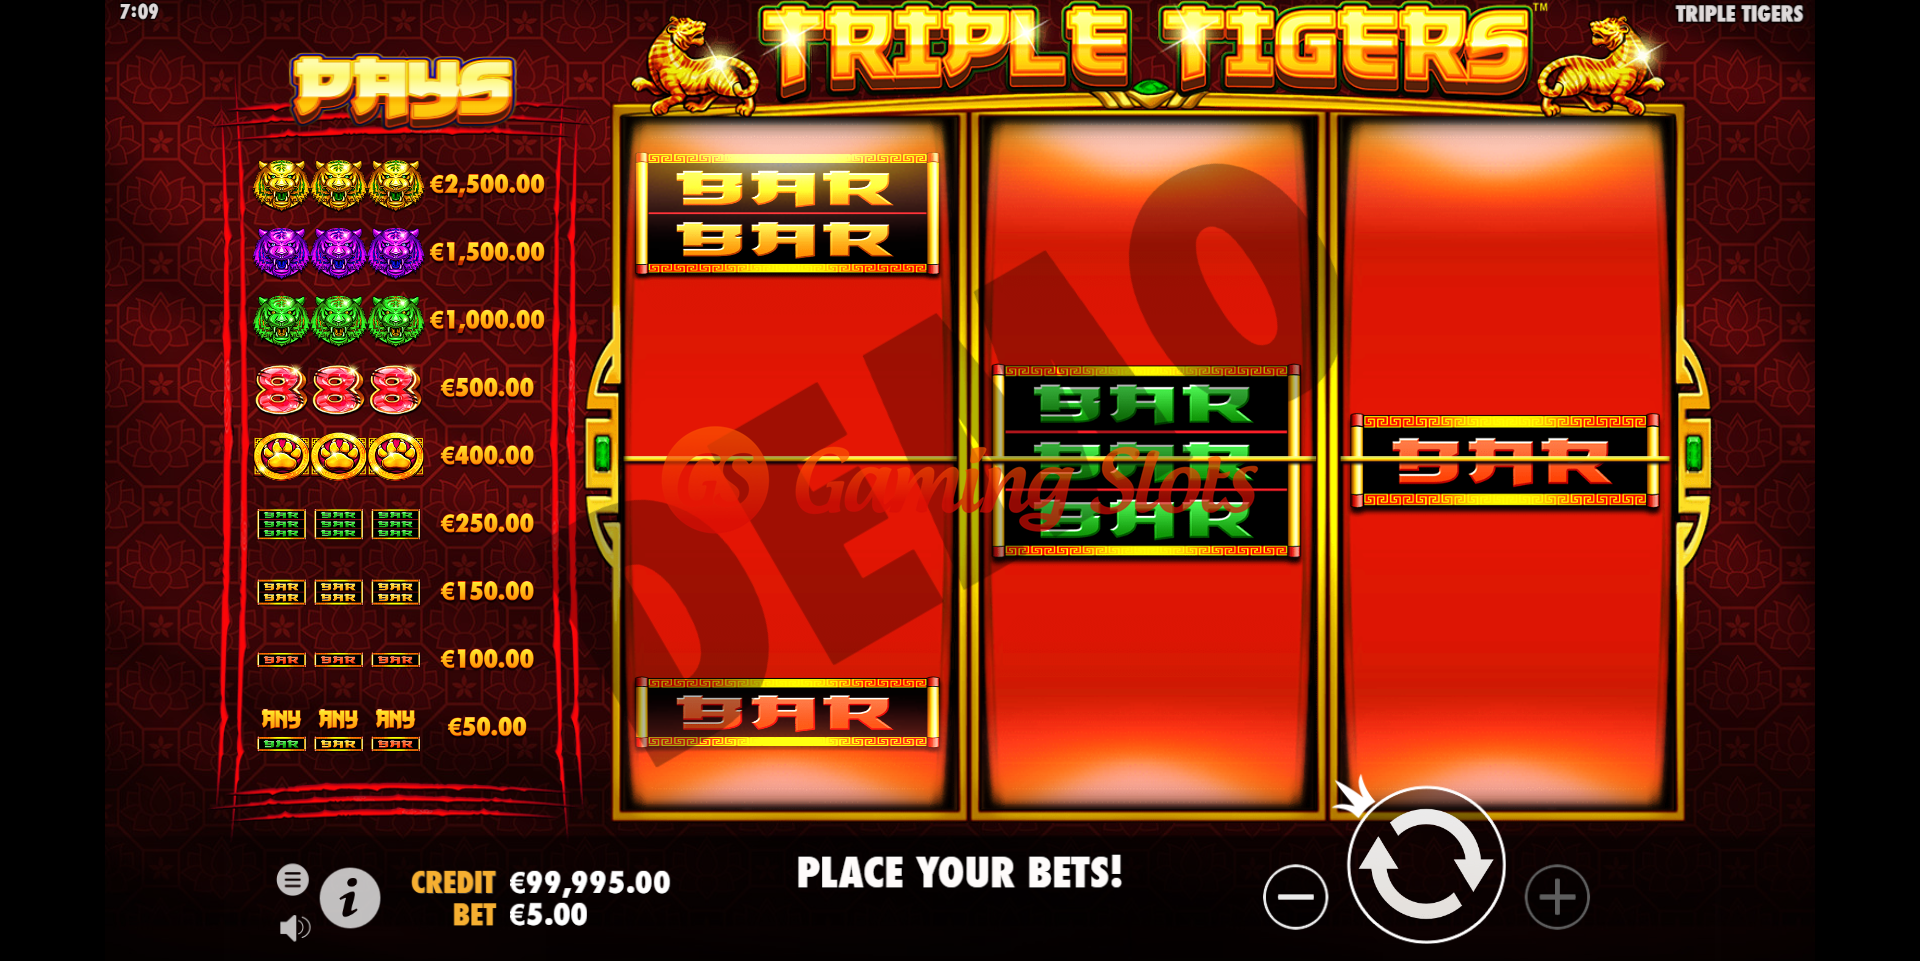 Base Game for Triple Tigers slot from Pragmatic Play